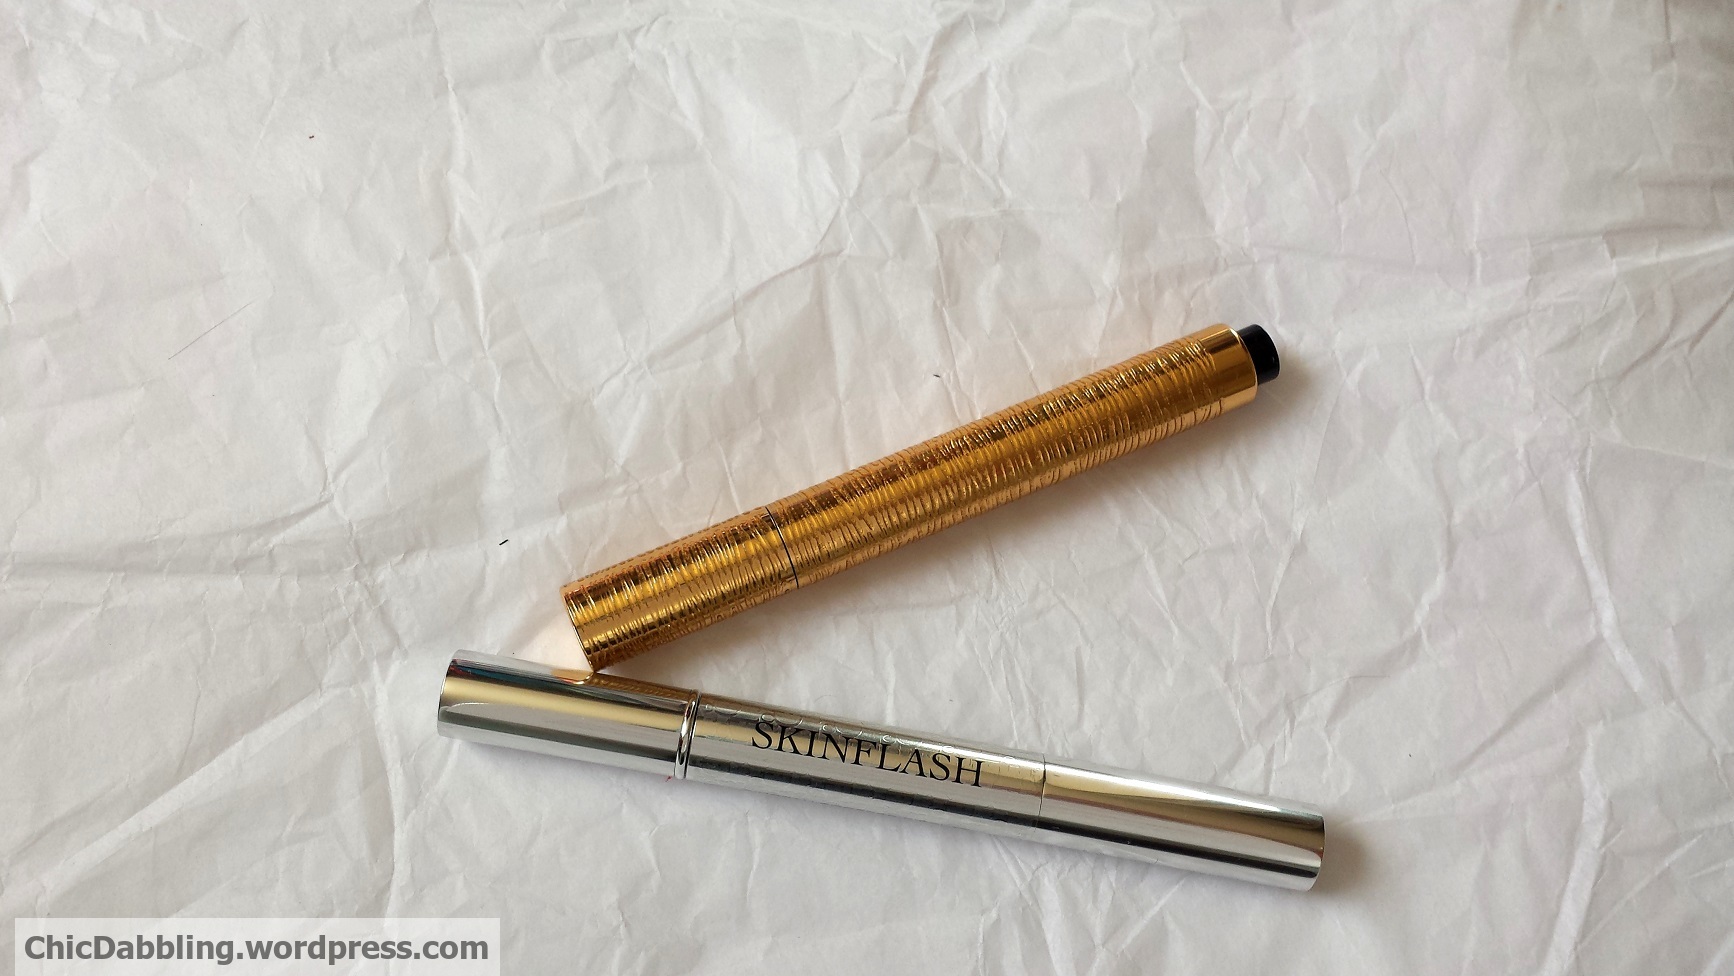 YSL Touche Eclat, Dior Skinflash and 